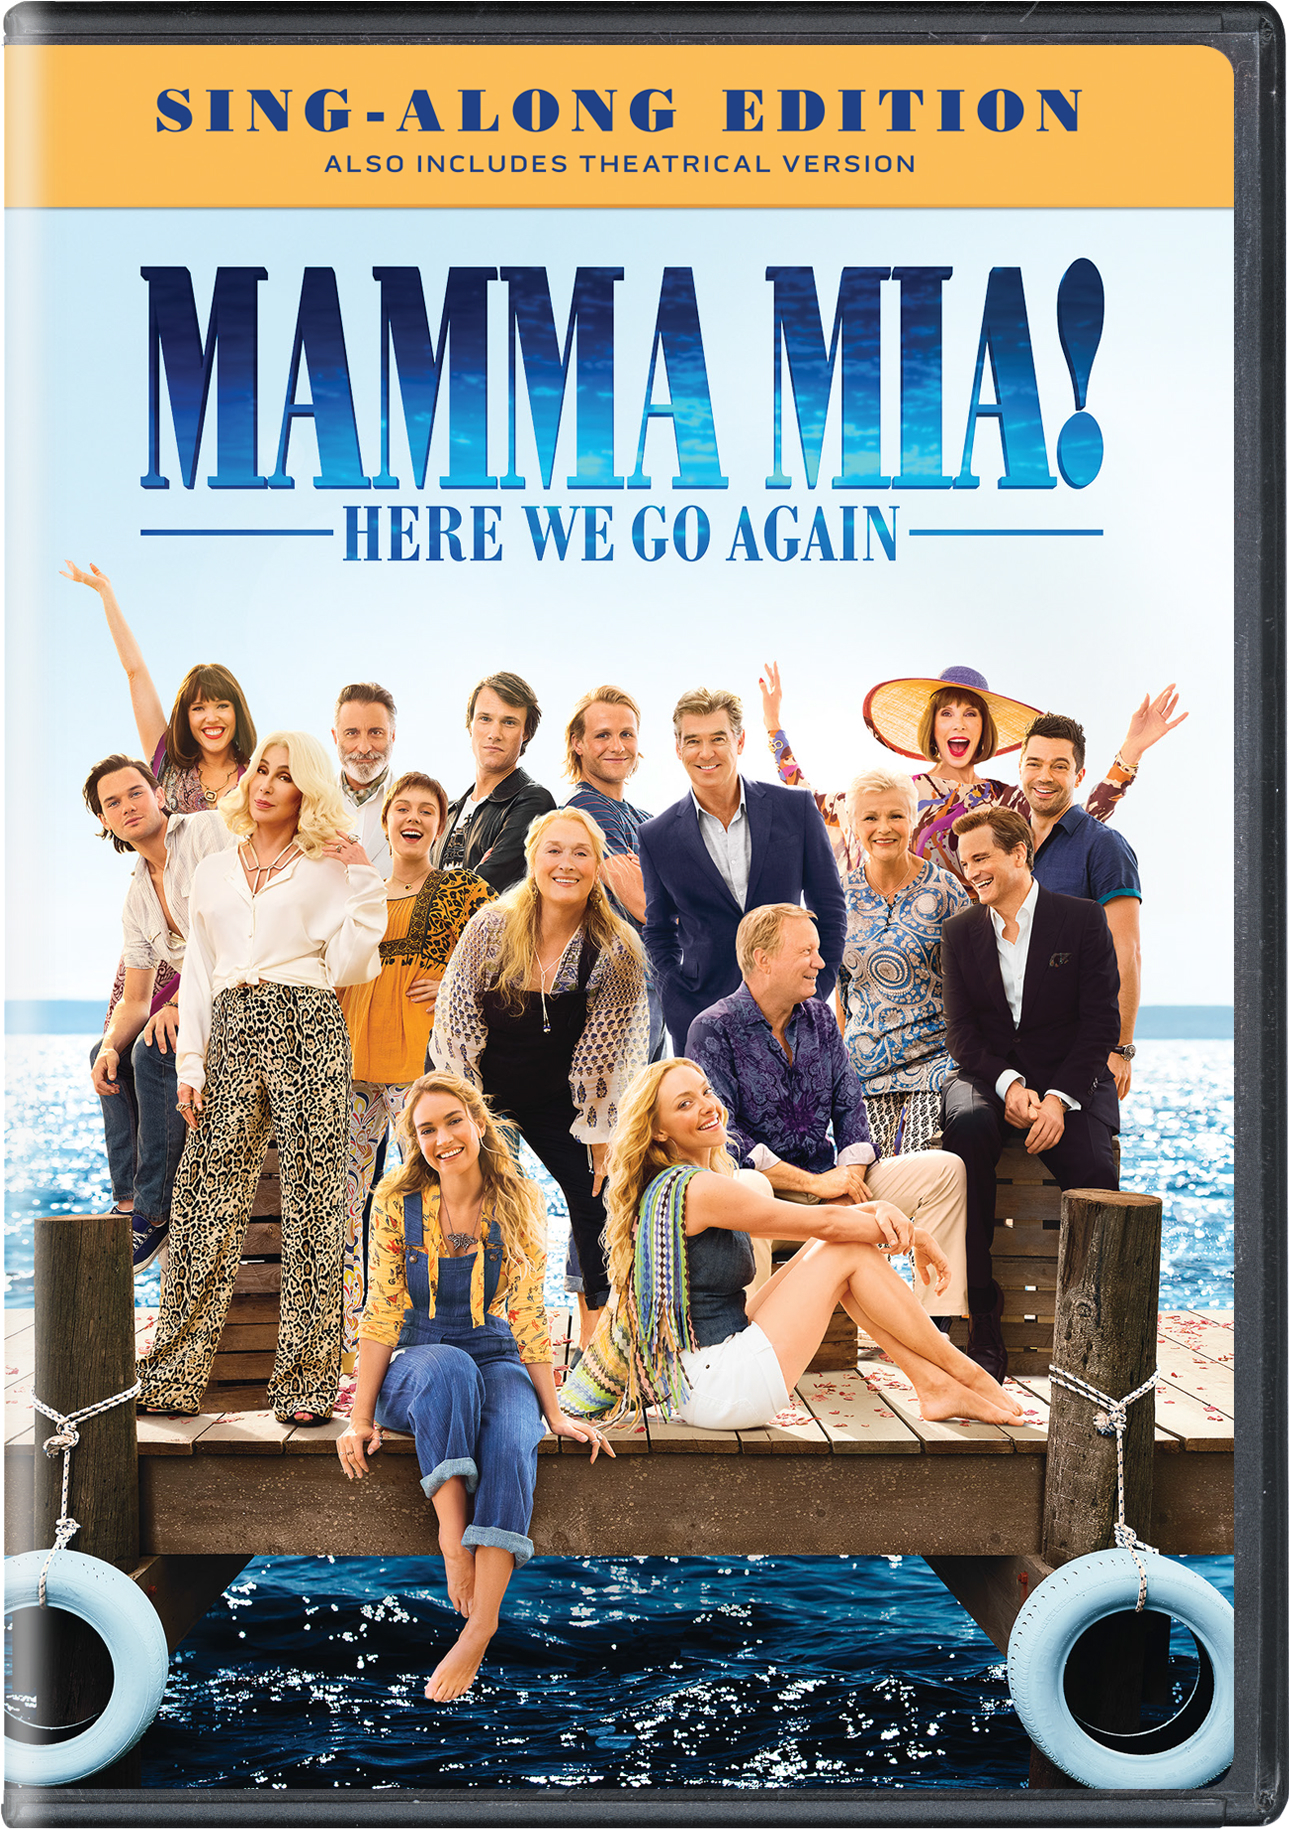 Mamma Mia! Here We Go Again (Normal (Sing-Along Edition)) - DVD [ 2018 ] - Musical Movies on DVD